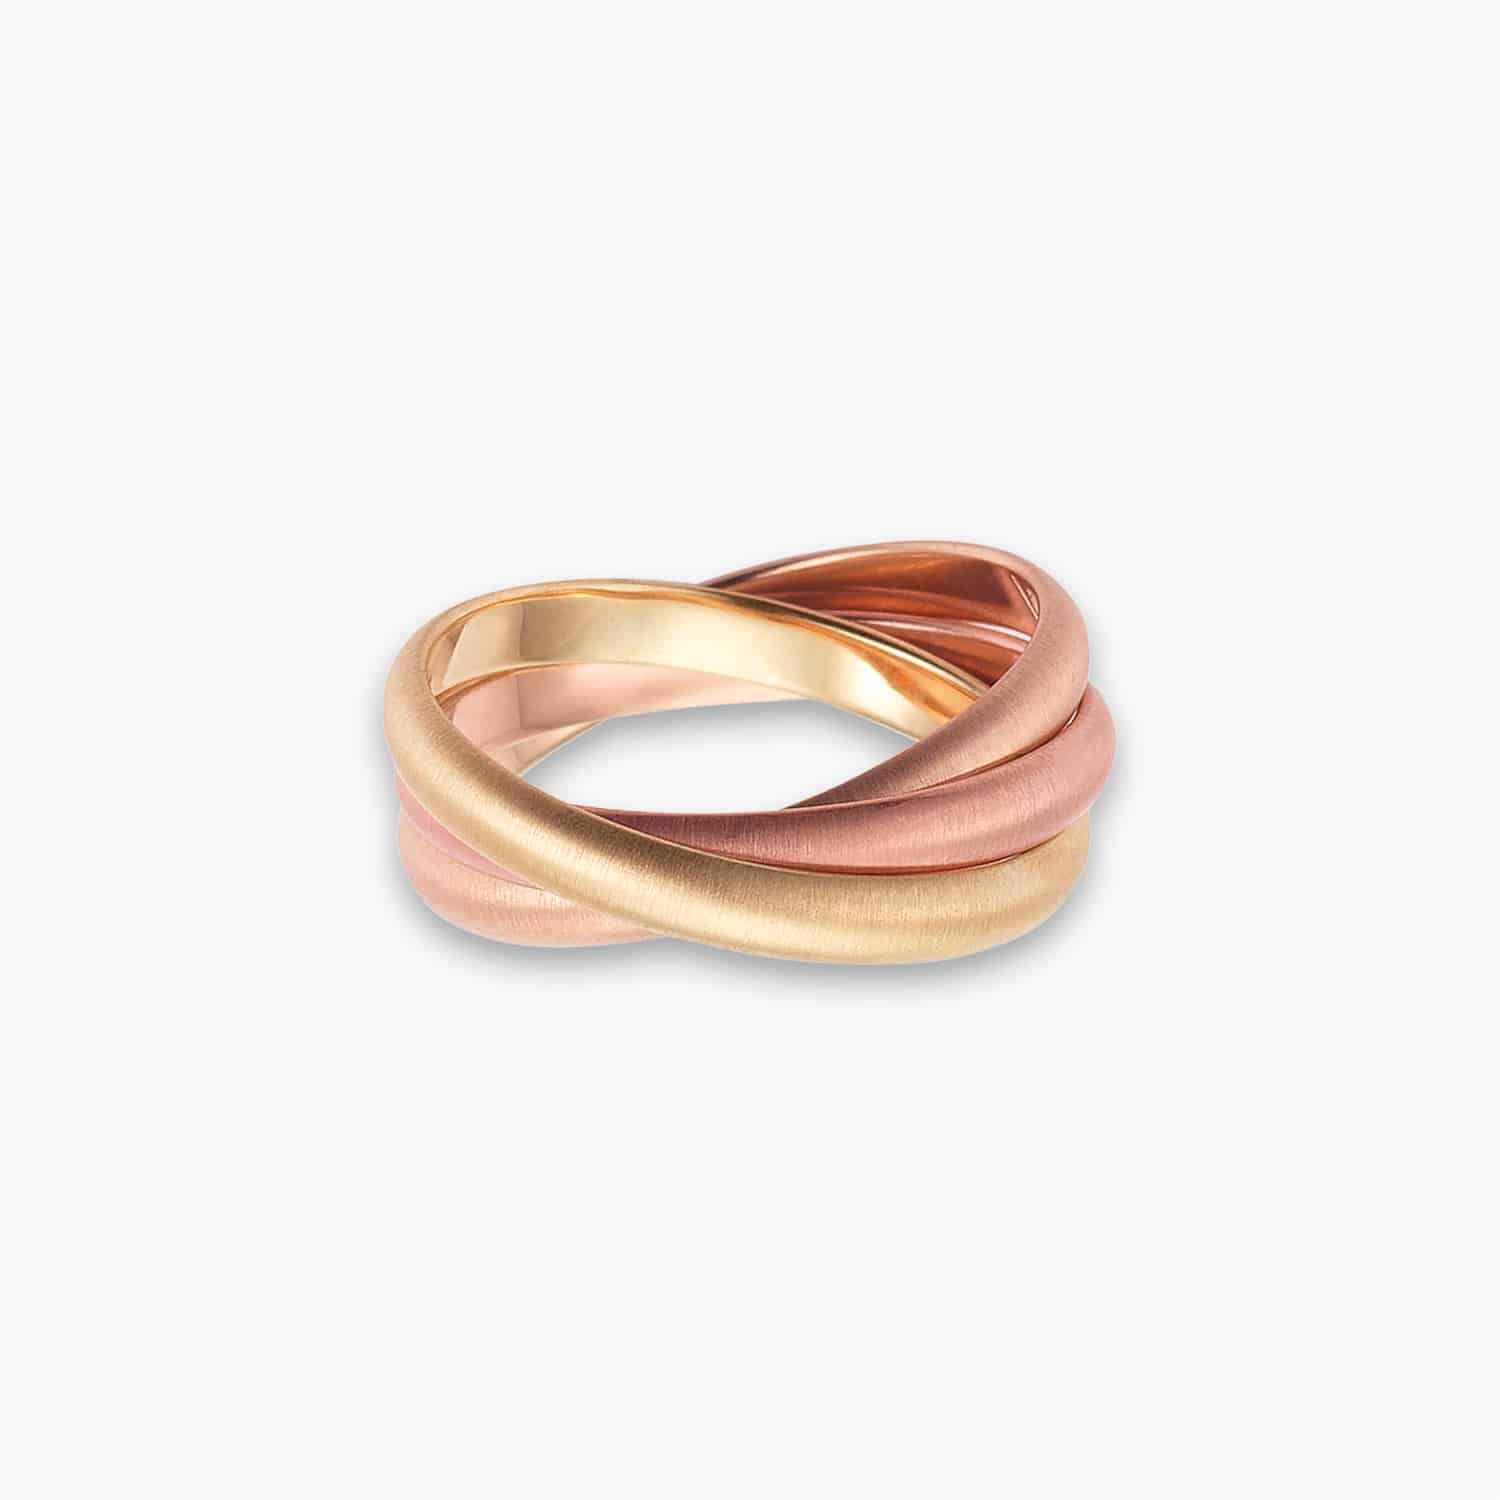 LVC SOLEIL TRINITY WEDDING BAND IN YELLOW AND DUAL ROSE GOLD TONES a wedding band for men in yellow and rose gold